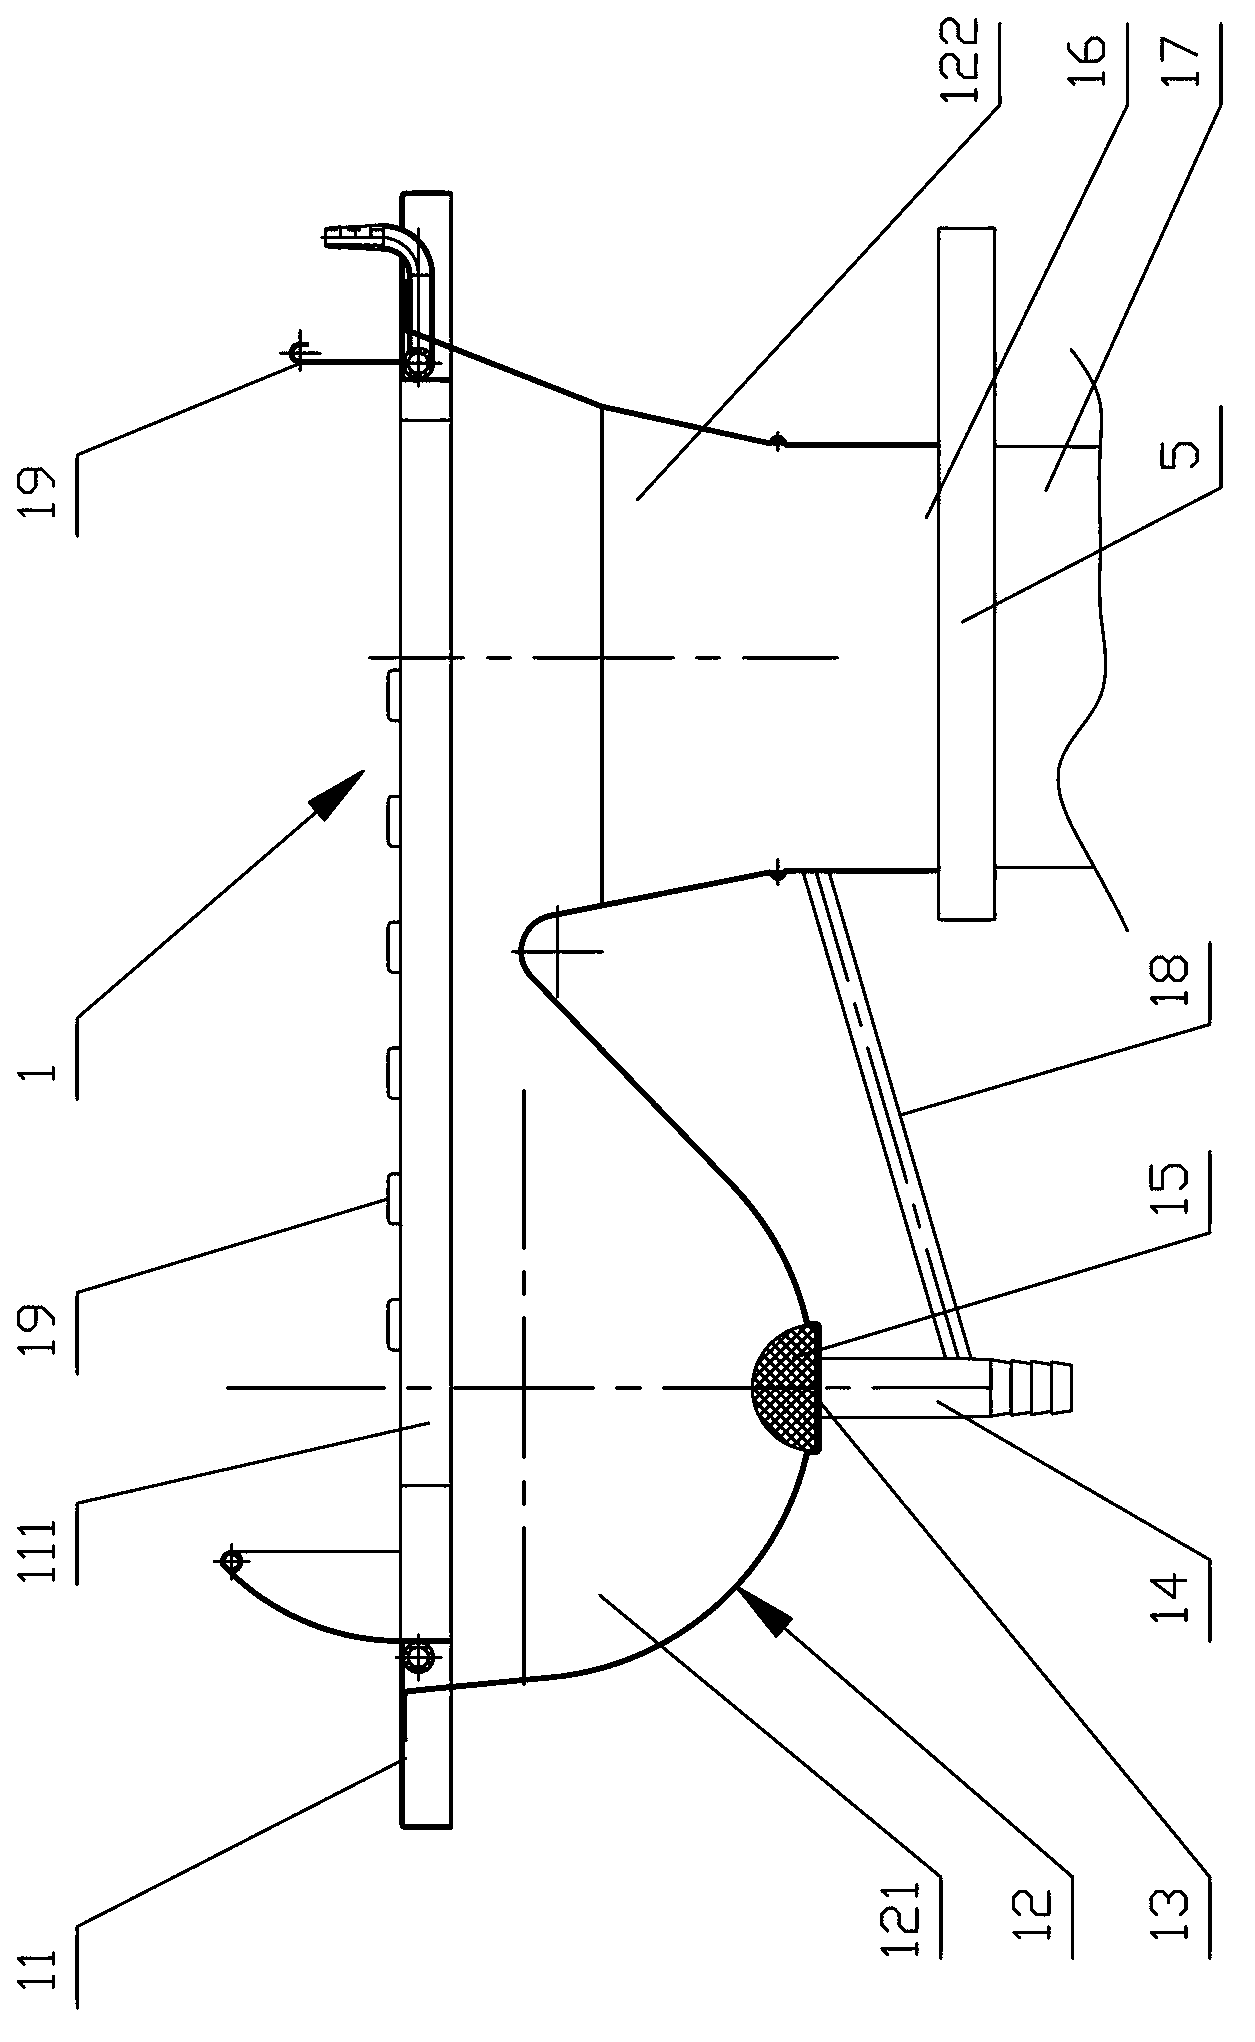 Solid-liquid separation toilet bowl and solid-liquid separation treatment system